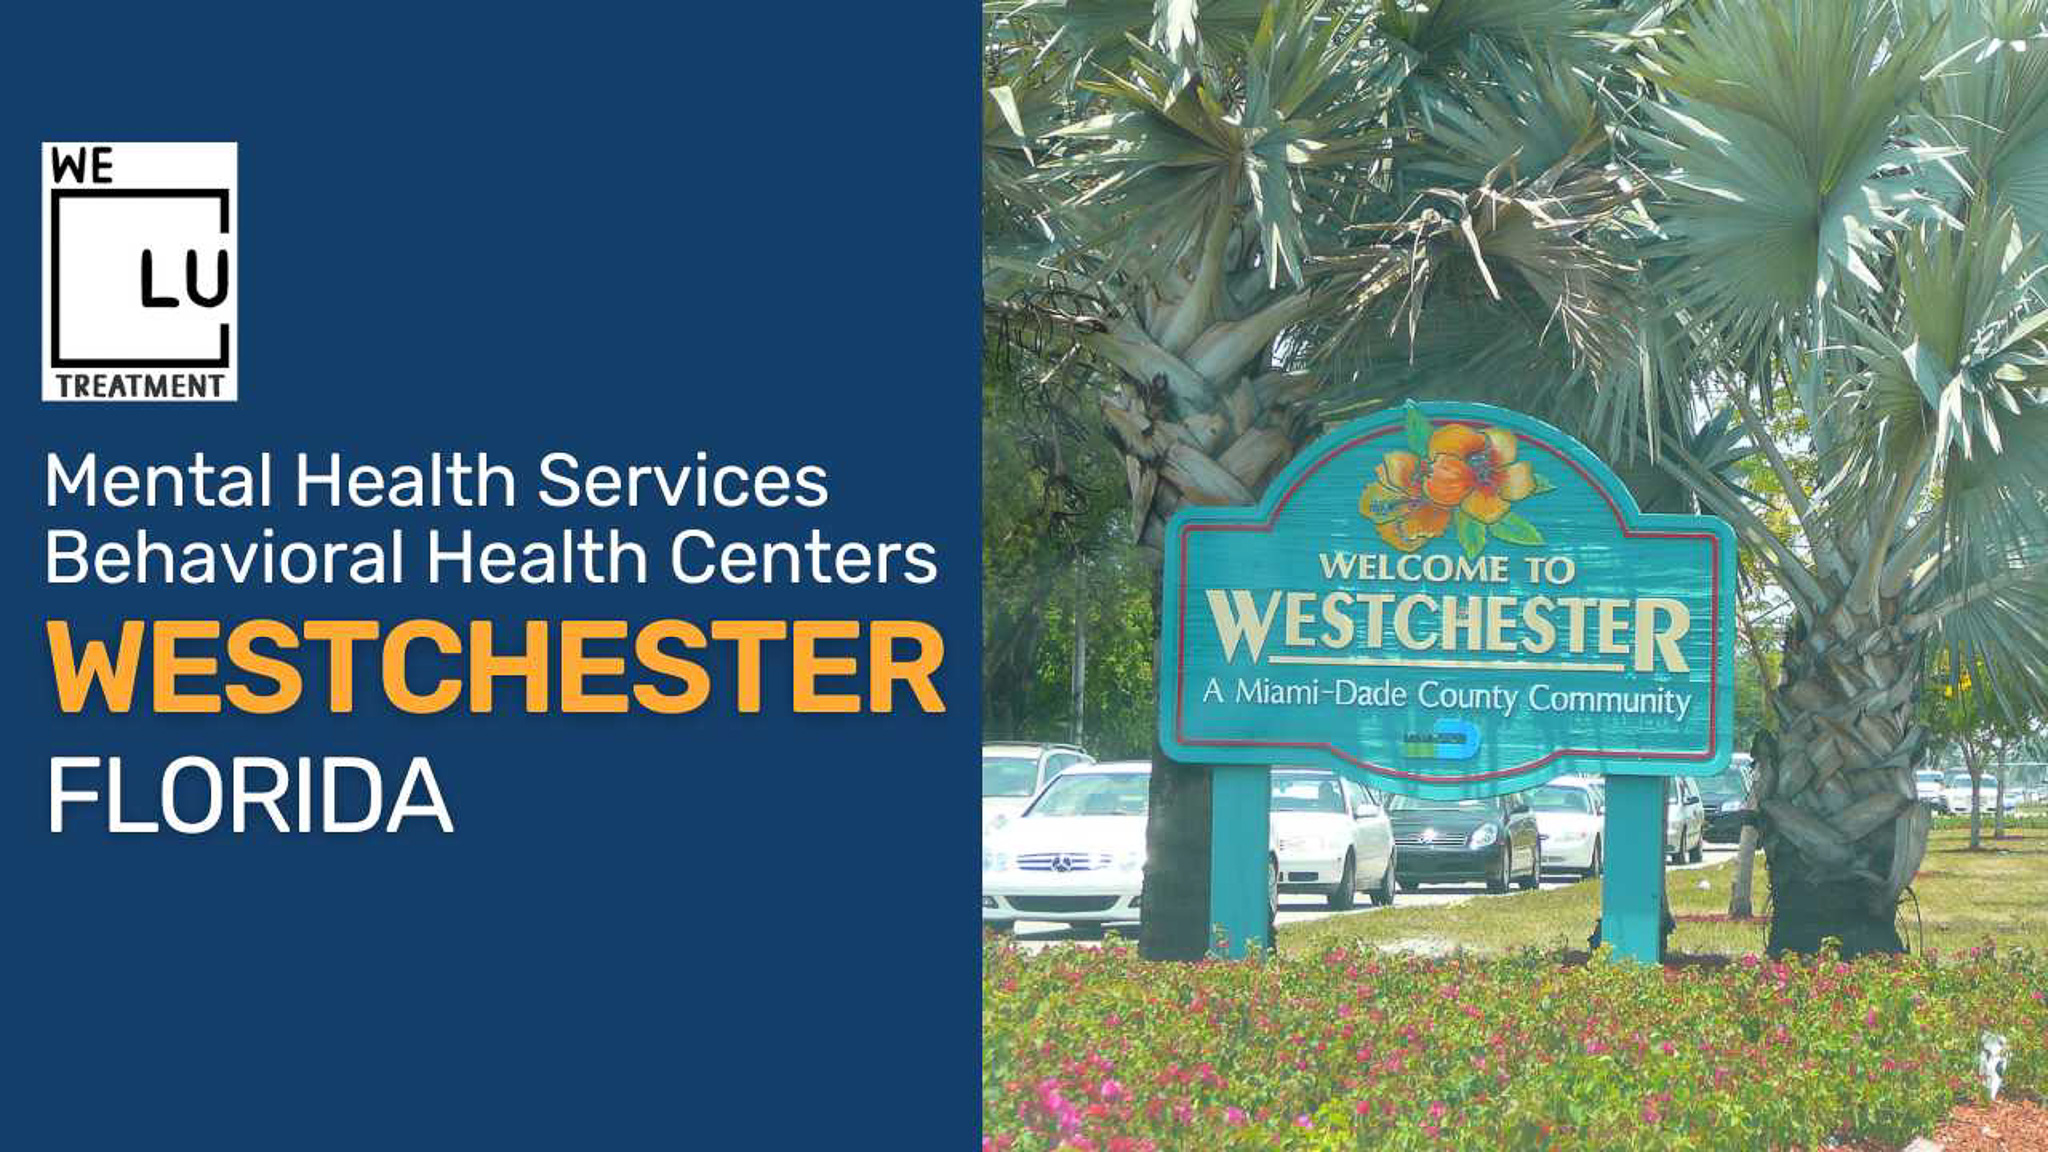 Westchester FL (MH) We Level Up treatment center for drug and alcohol rehab detox and mental health services - Image 1